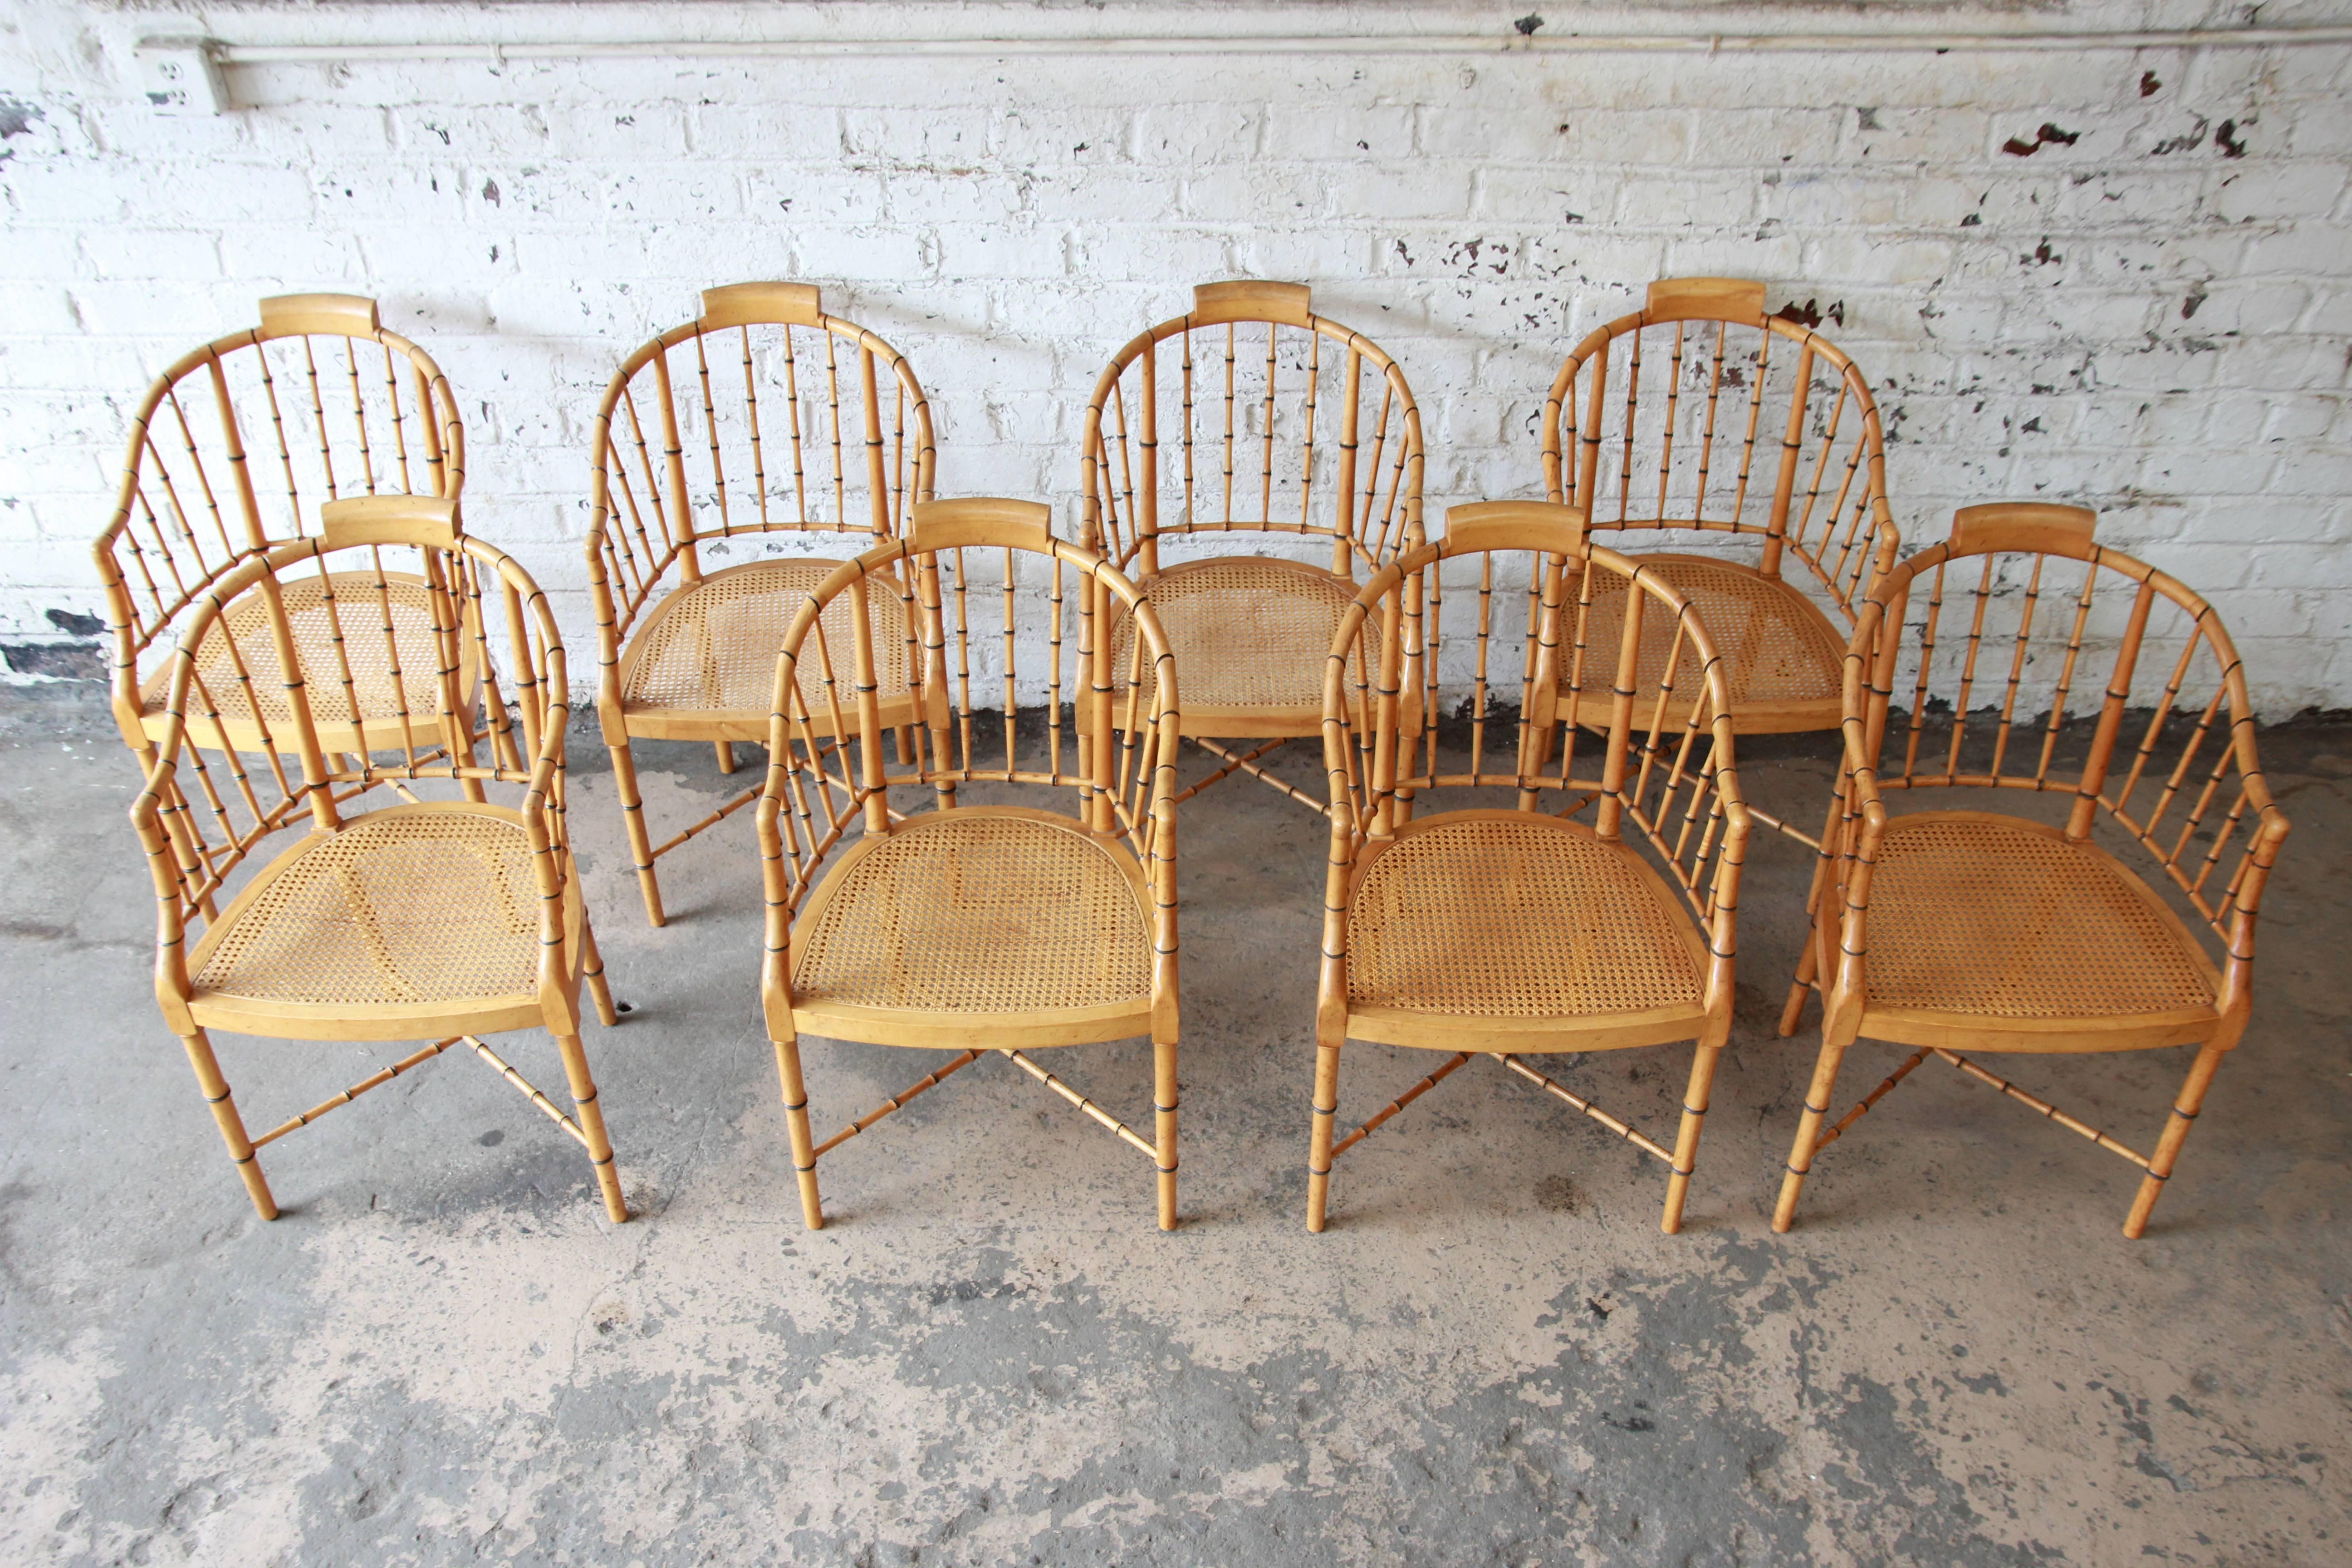 Outstanding Regency bamboo chairs produced by Baker Furniture, circa 1960. The chairs feature tub-shaped backs and cane seats. They are raised on four slender legs, connected to each other through an X-shaped cross stretcher. The original of the